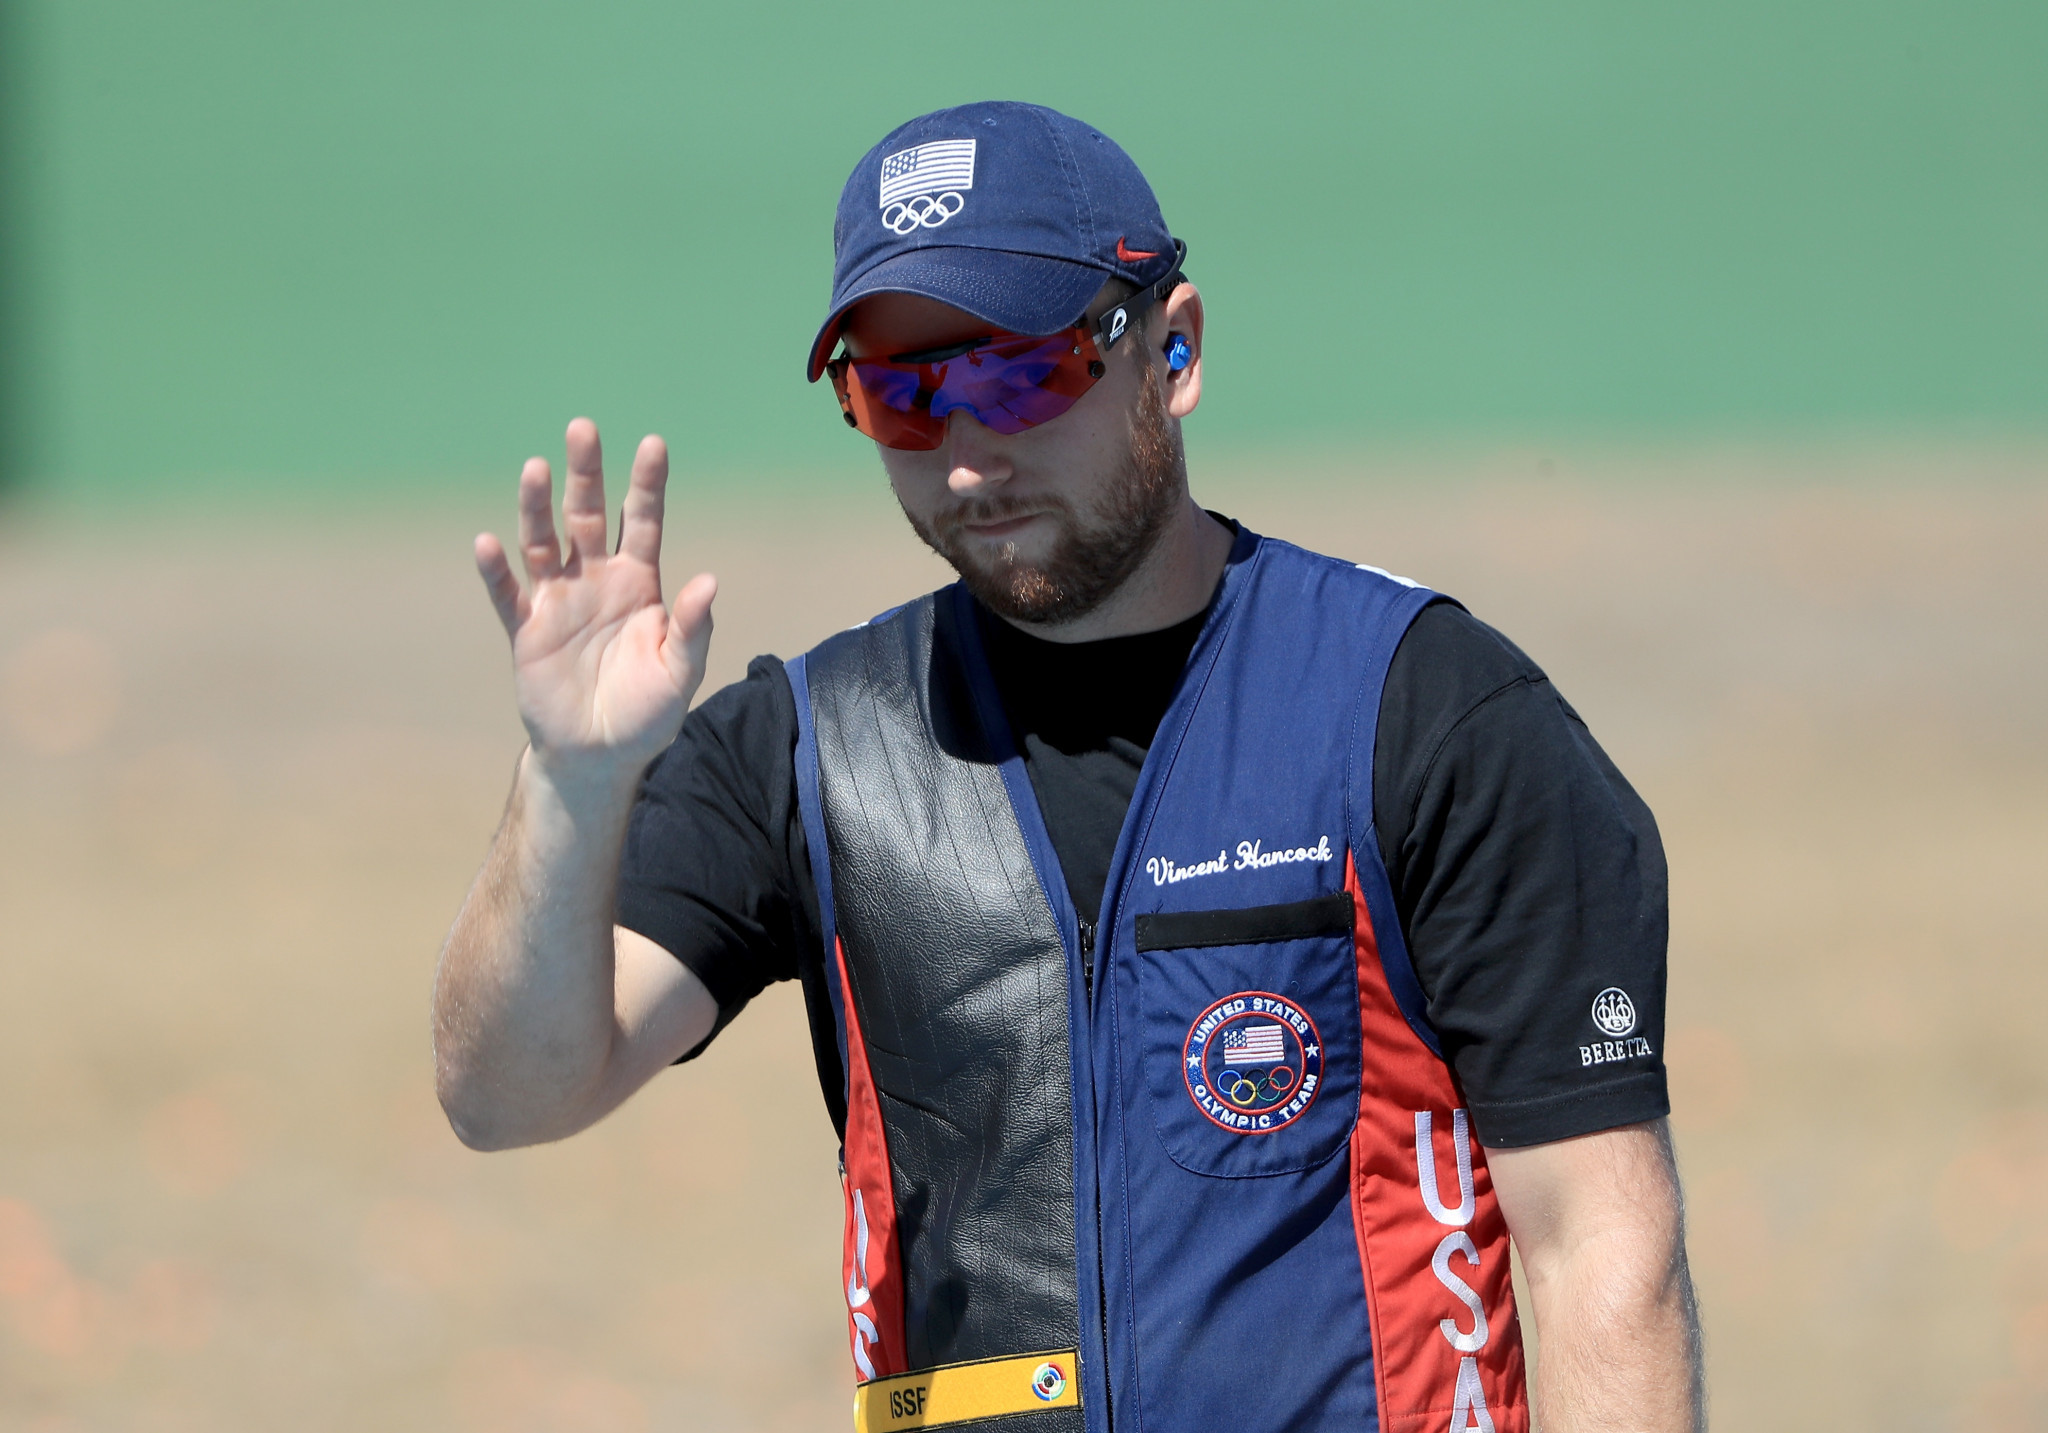 Flawless shooting from Hancock seals skeet gold at Acapulco World Cup